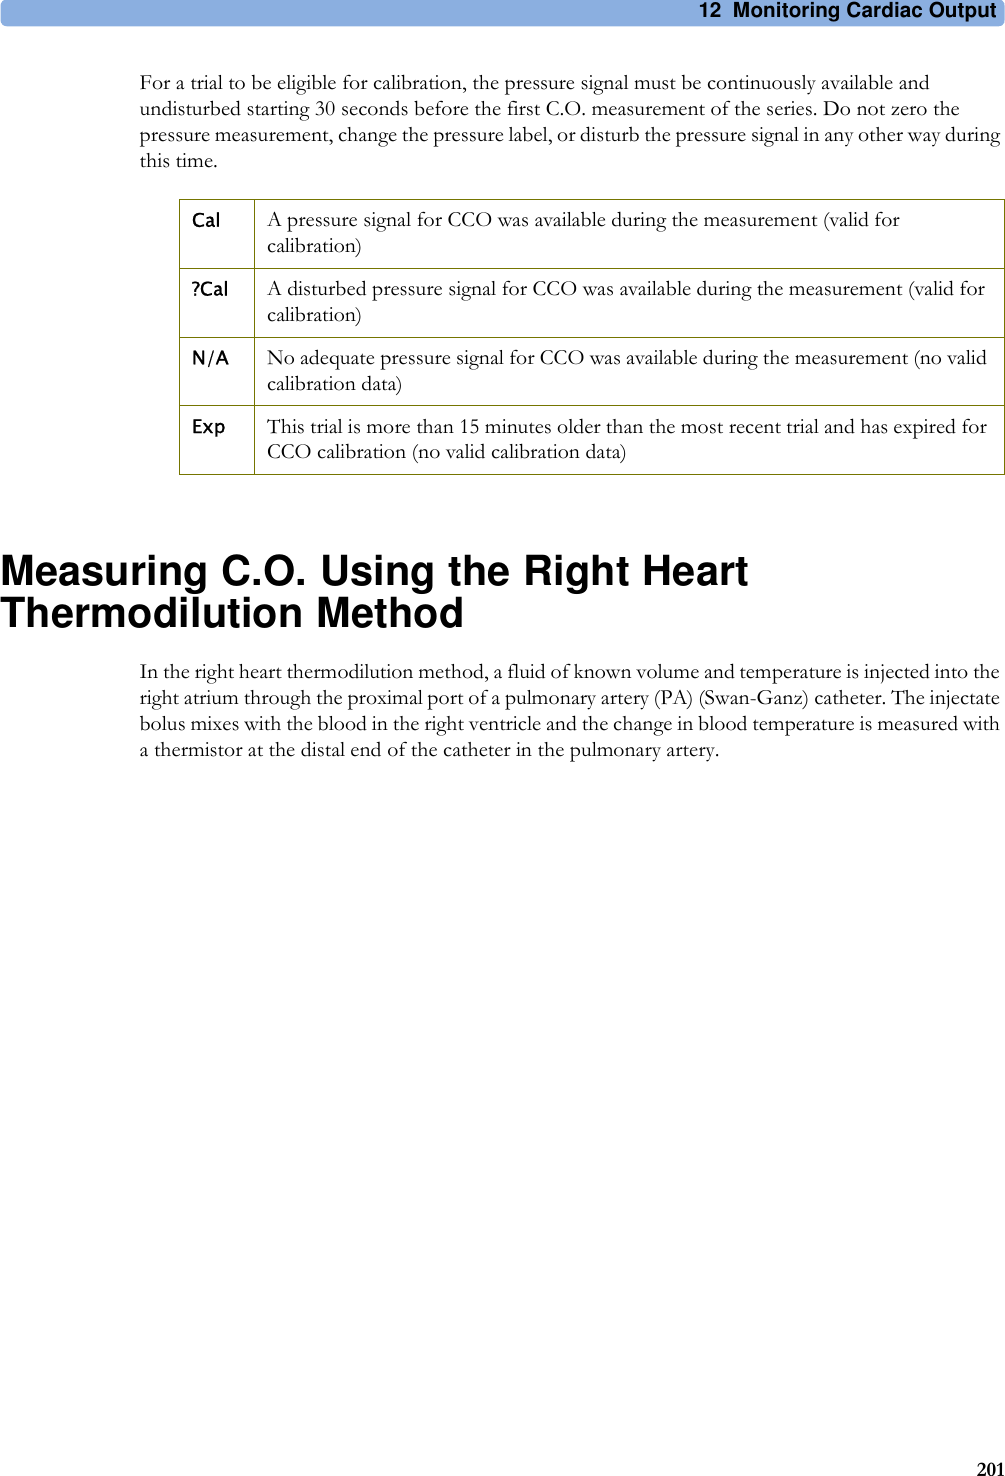 12 Monitoring Cardiac Output201For a trial to be eligible for calibration, the pressure signal must be continuously available and undisturbed starting 30 seconds before the first C.O. measurement of the series. Do not zero the pressure measurement, change the pressure label, or disturb the pressure signal in any other way during this time.Measuring C.O. Using the Right Heart Thermodilution MethodIn the right heart thermodilution method, a fluid of known volume and temperature is injected into the right atrium through the proximal port of a pulmonary artery (PA) (Swan-Ganz) catheter. The injectate bolus mixes with the blood in the right ventricle and the change in blood temperature is measured with a thermistor at the distal end of the catheter in the pulmonary artery.Cal A pressure signal for CCO was available during the measurement (valid for calibration)?Cal A disturbed pressure signal for CCO was available during the measurement (valid for calibration)N/A No adequate pressure signal for CCO was available during the measurement (no valid calibration data)Exp This trial is more than 15 minutes older than the most recent trial and has expired for CCO calibration (no valid calibration data)